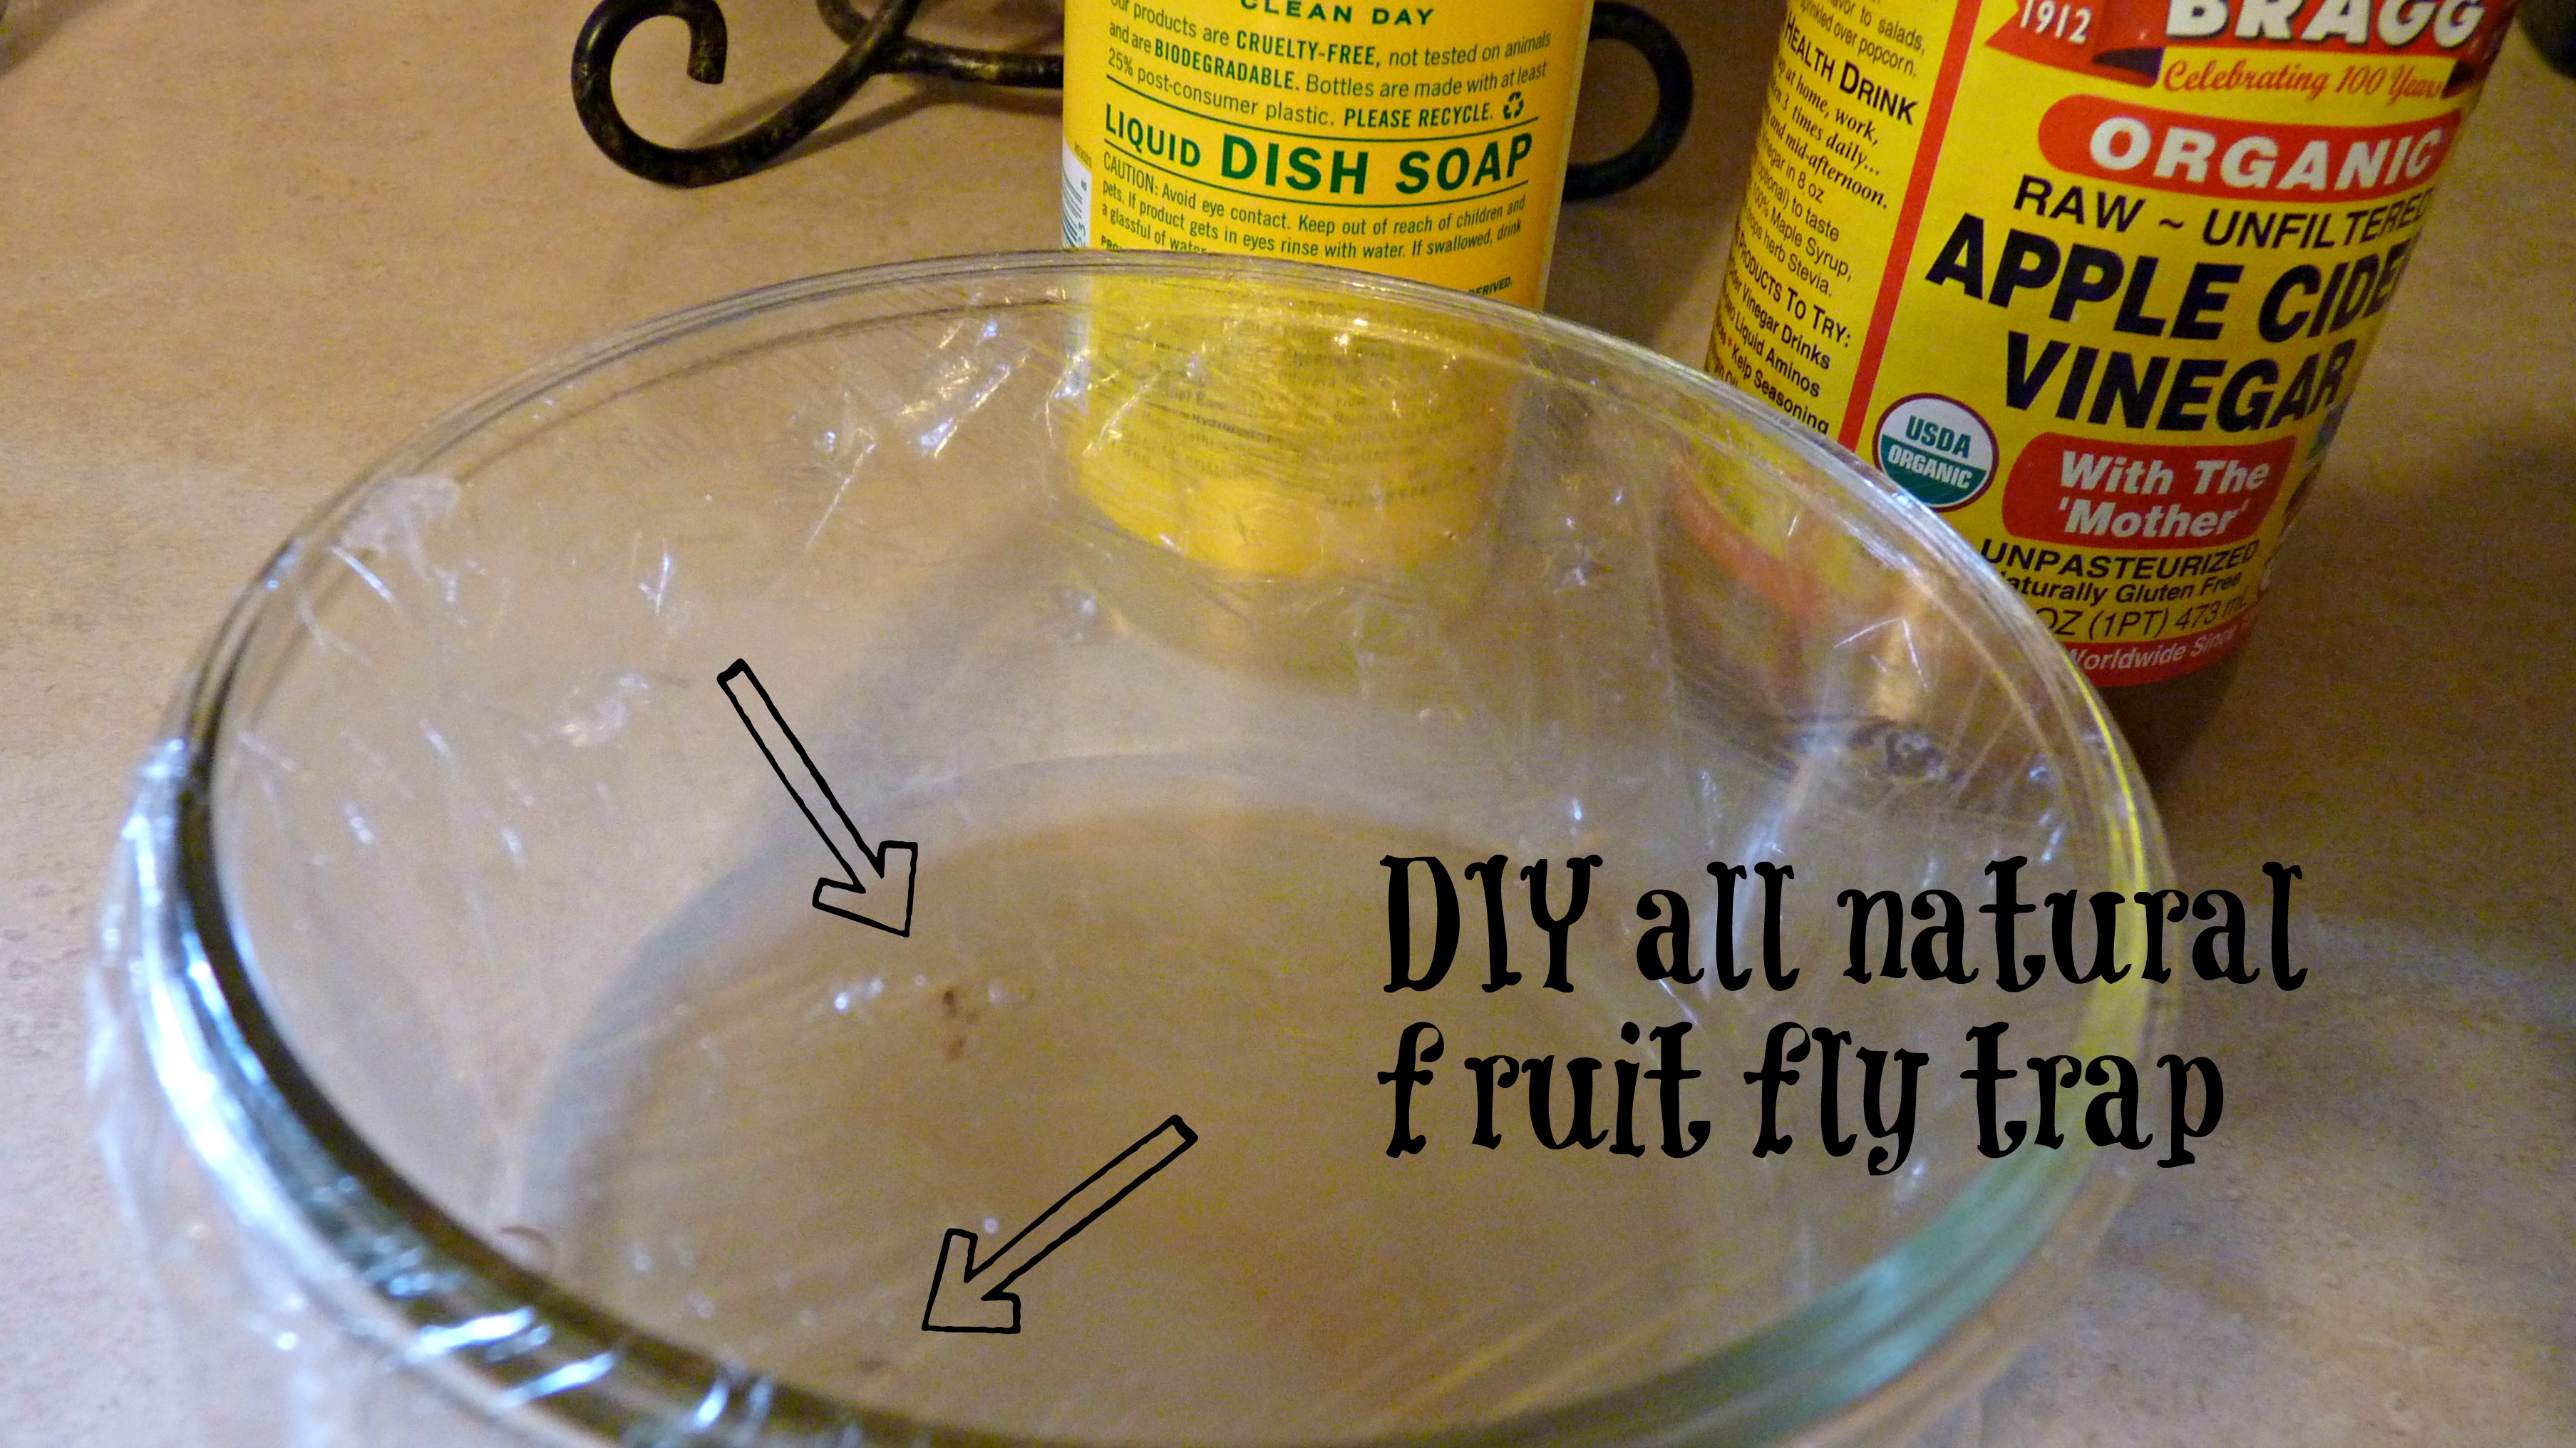 Homemade Fruit Fly Trap - The BEST Way To Get Rid Of Fruit Flies!